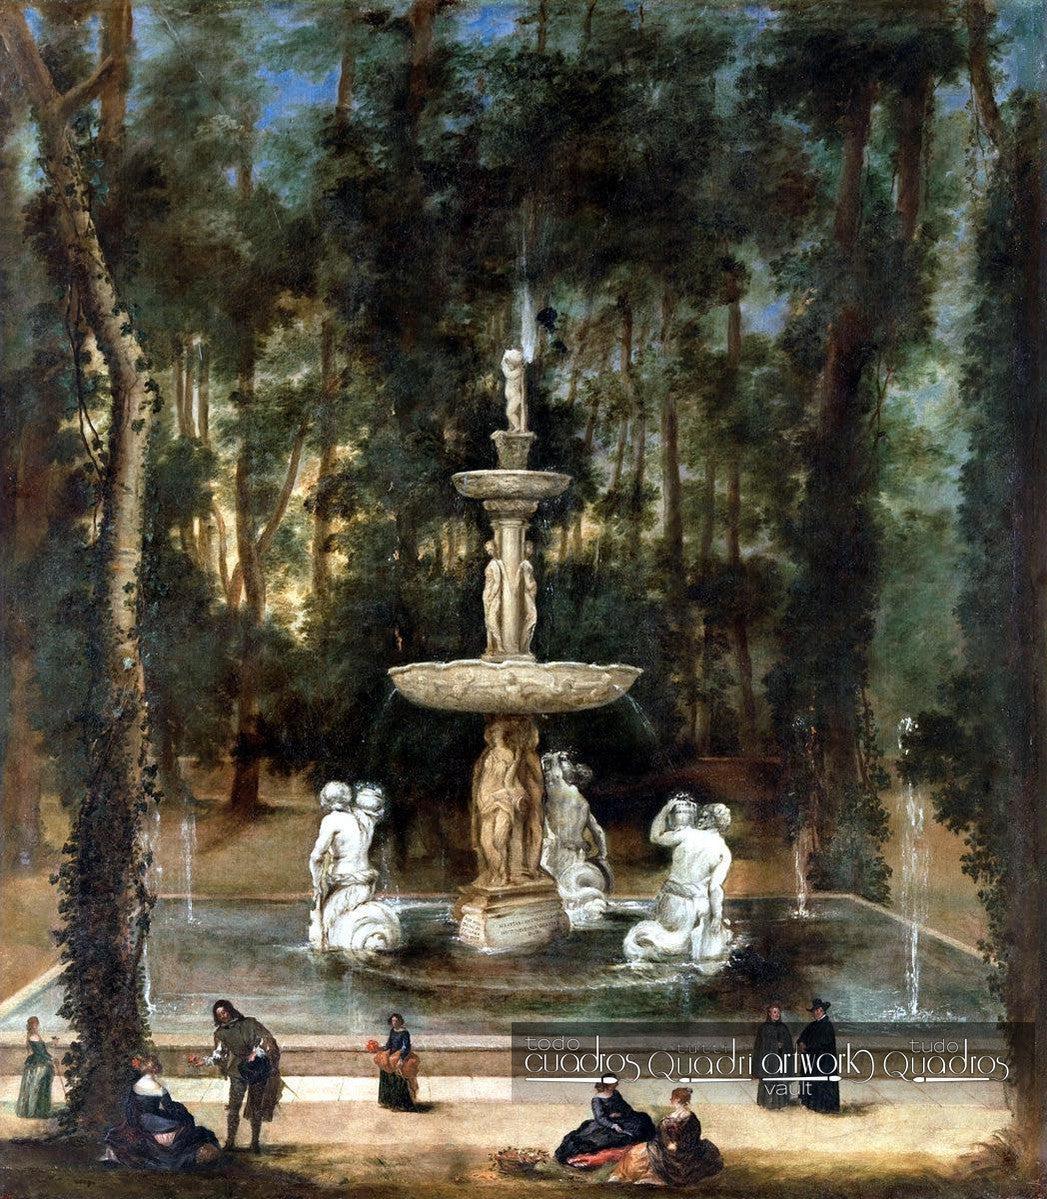 The Fountain of the Tritons in the Island Garden, Aranjuez, Velázquez